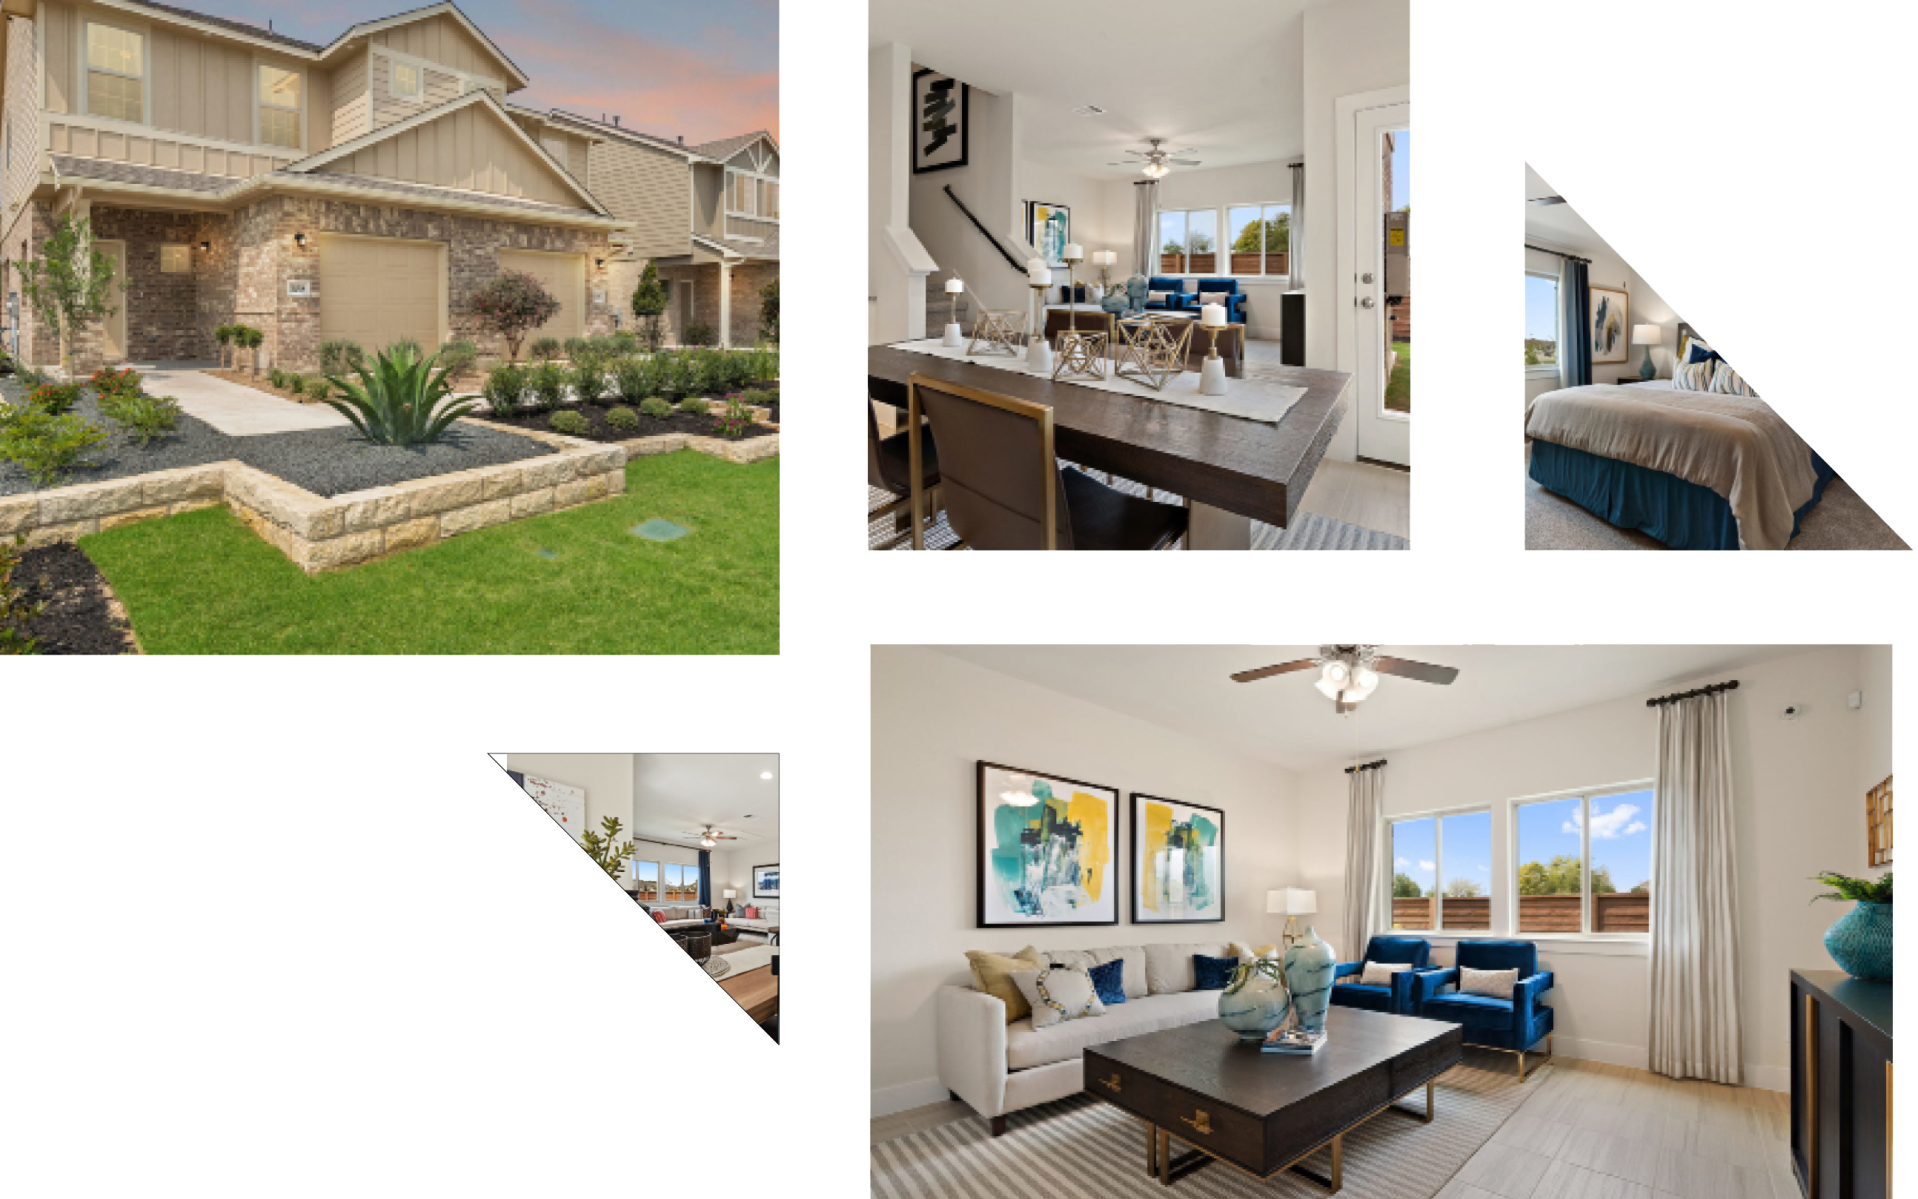 Picture Collage of Saddle Creek Twinhomes Showhome